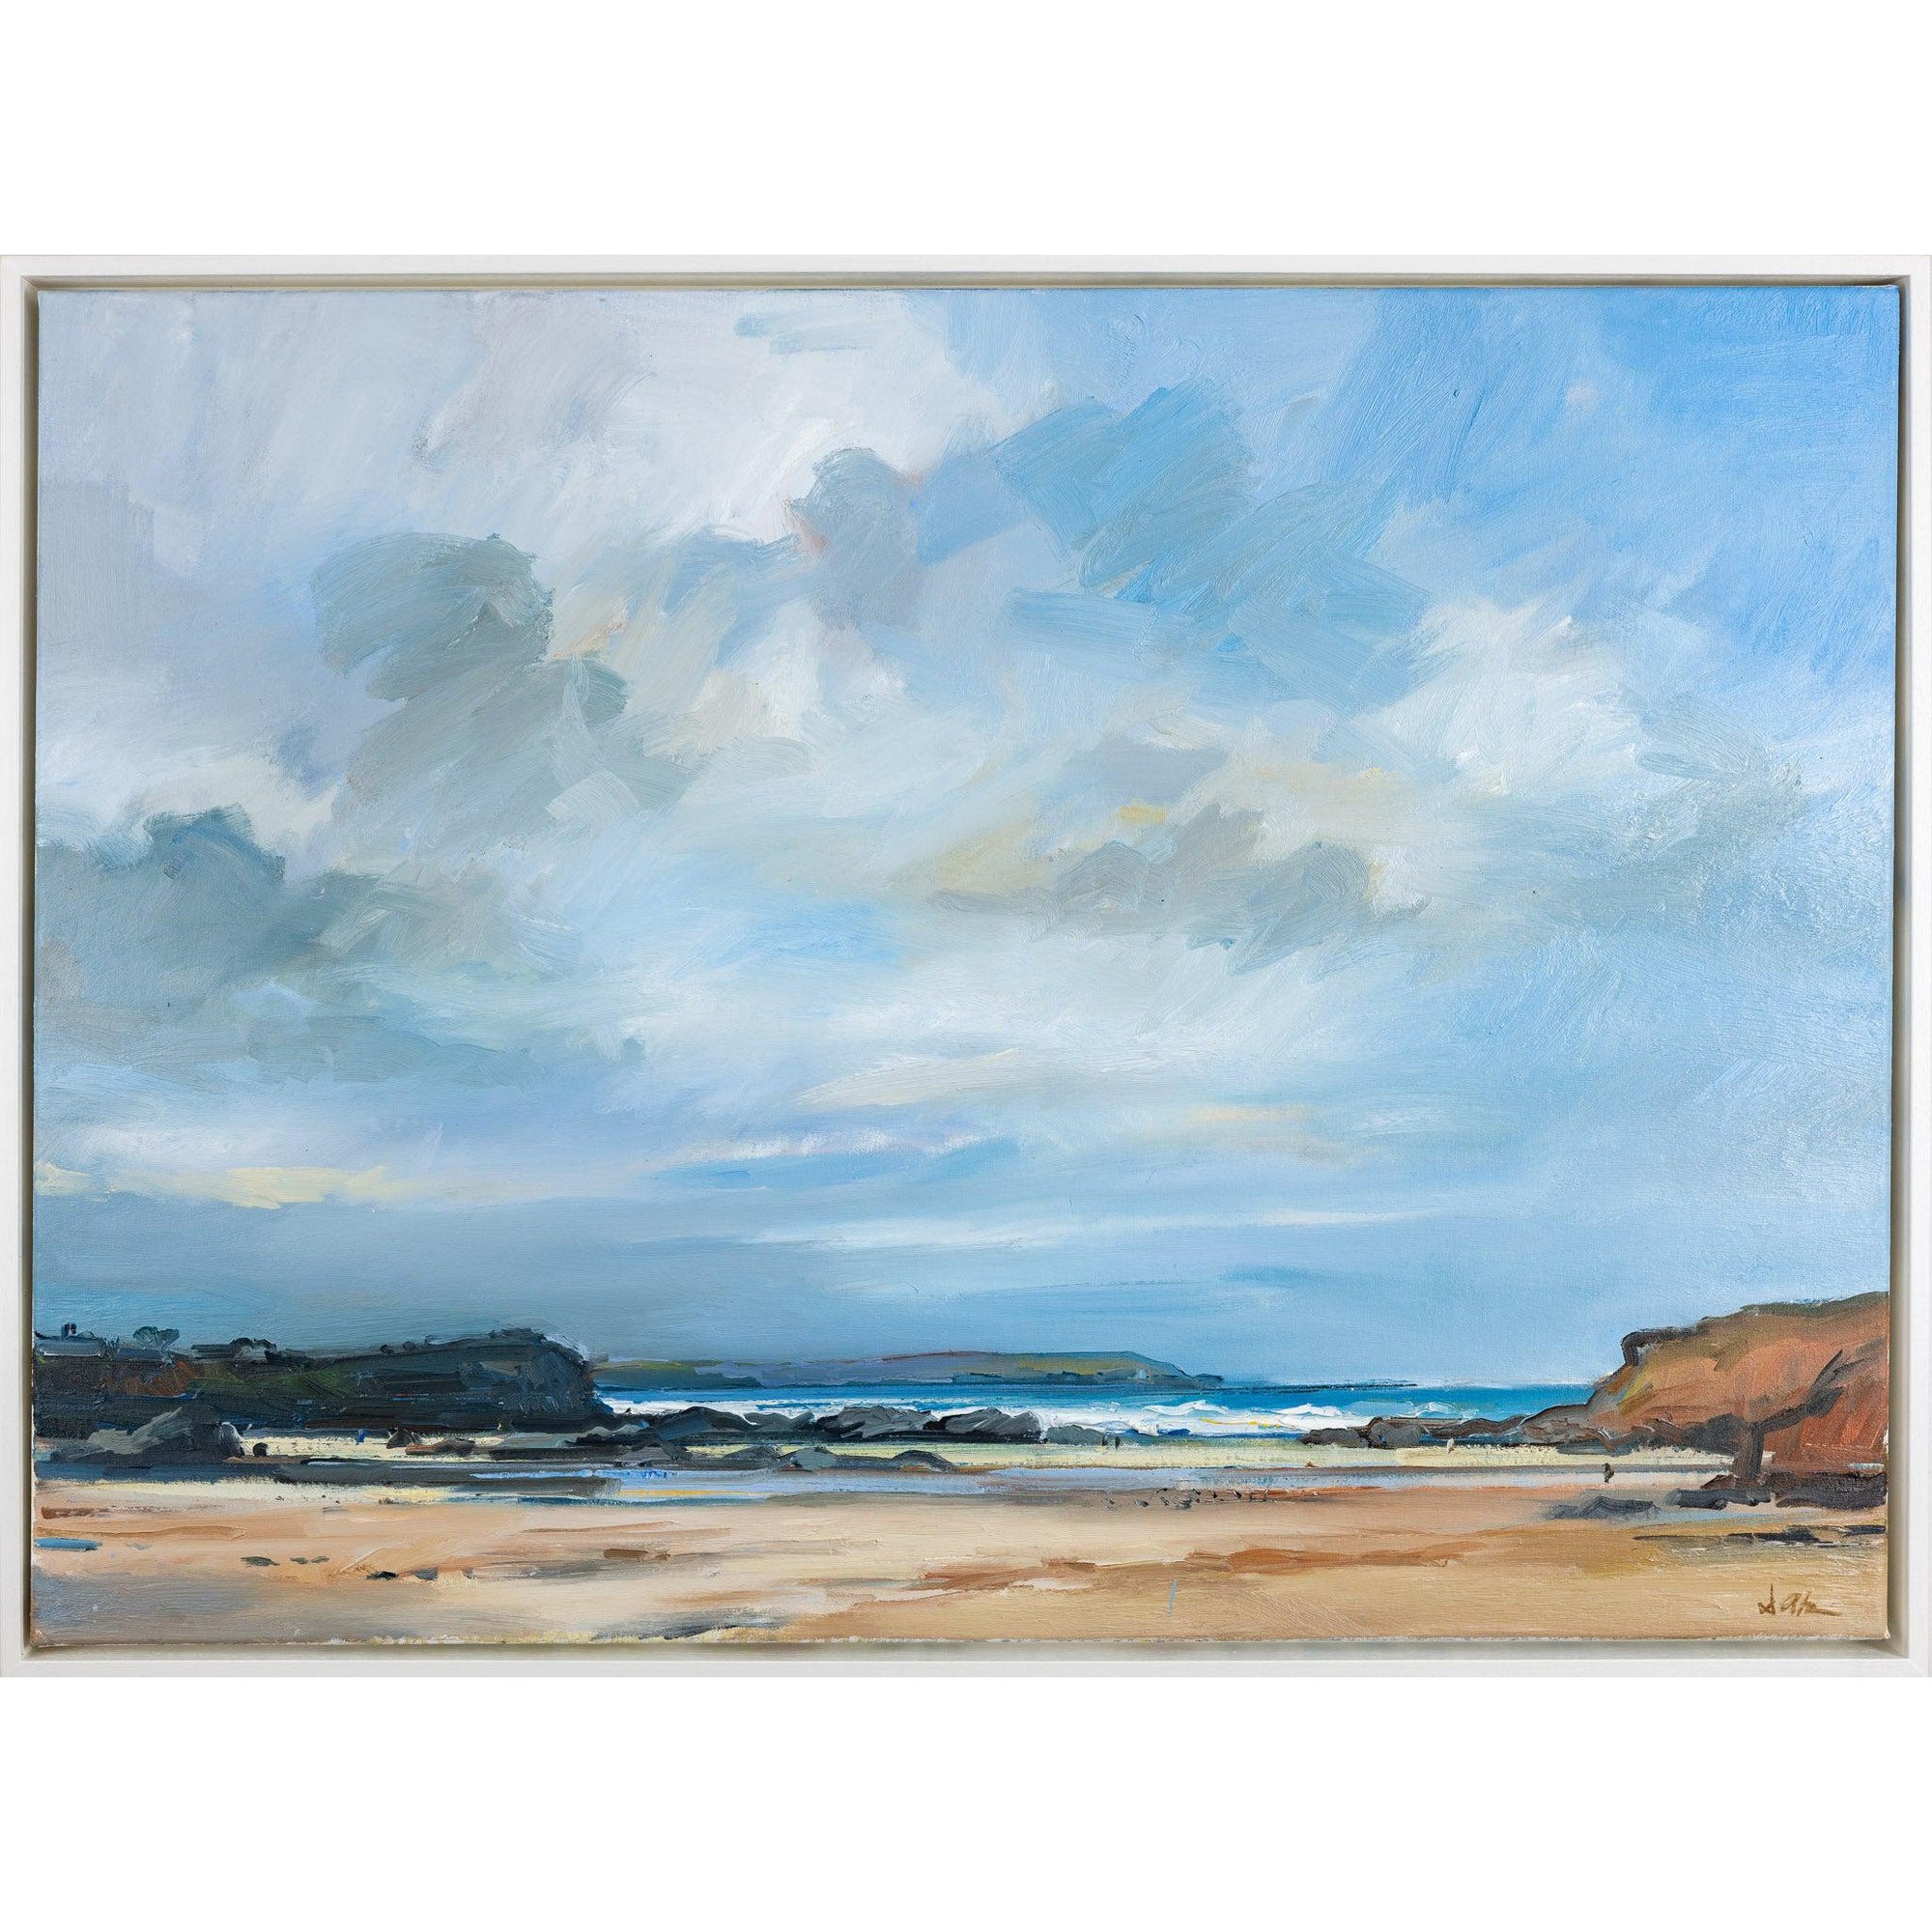 'The Sea And Sky, Trevone Beach' oil on canvas original by David Atkins, available at Padstow Gallery, Cornwall